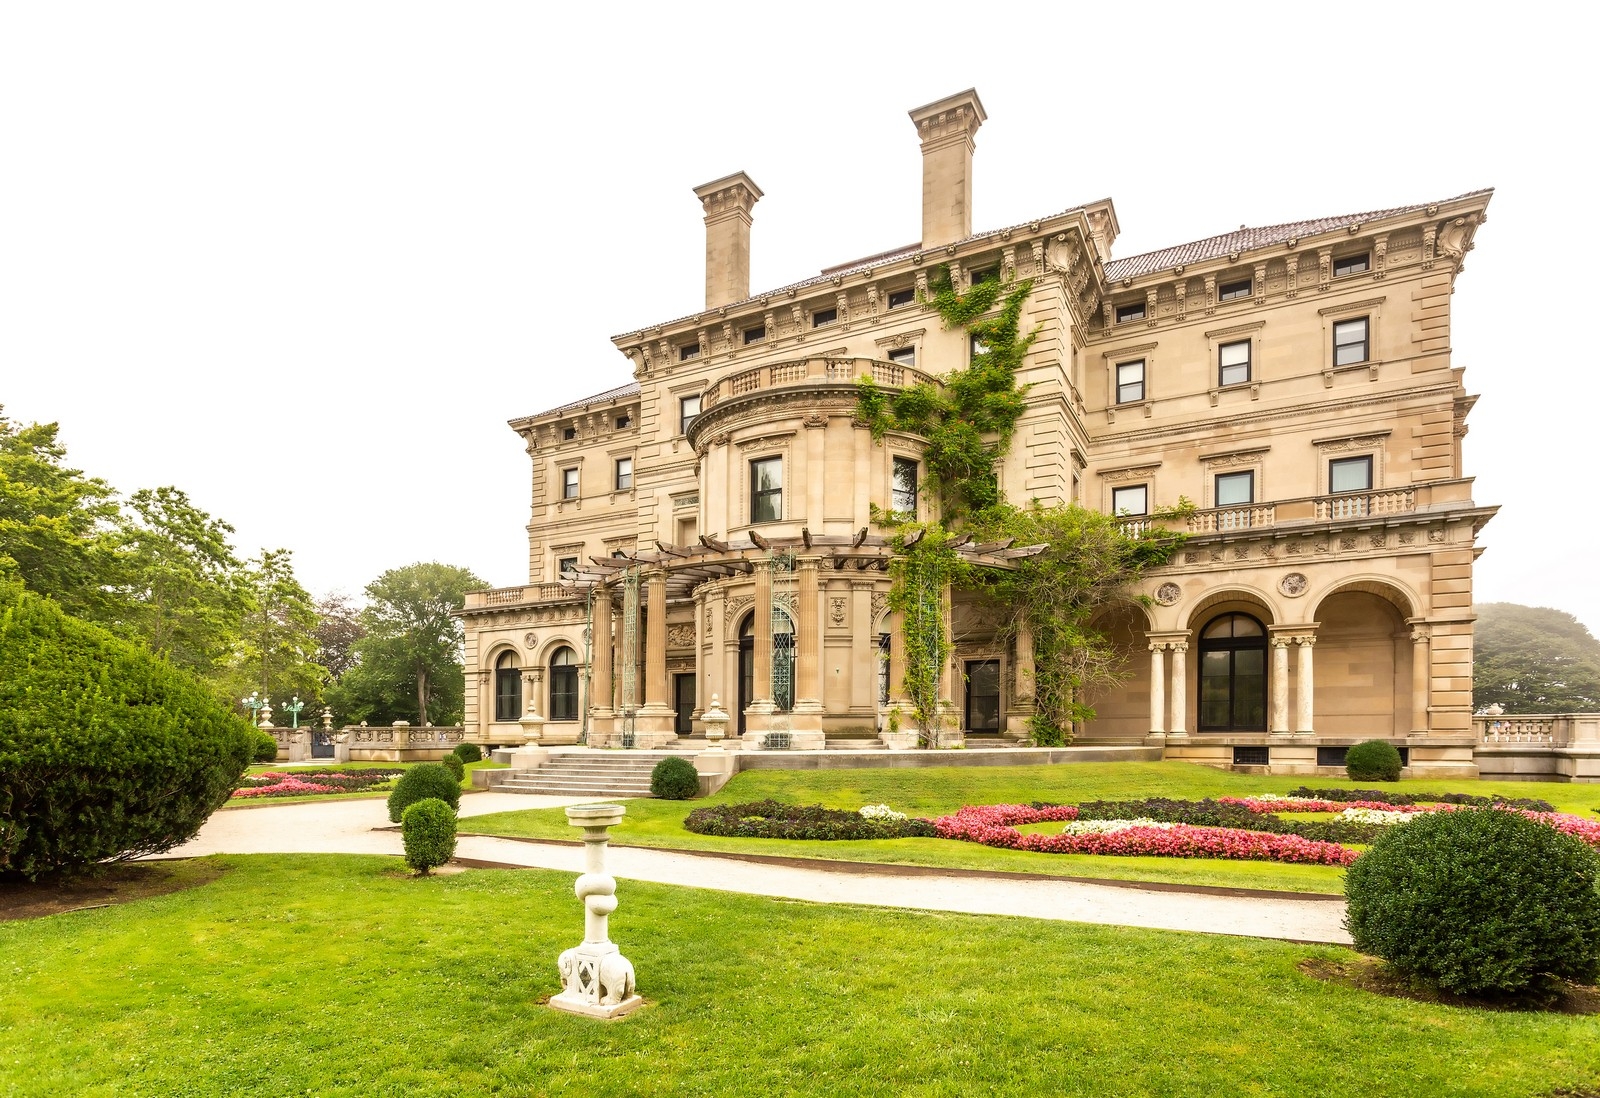 https://res.cloudinary.com/see-sight-tours/image/upload/v1581441869/the-breakers-mansion.jpg